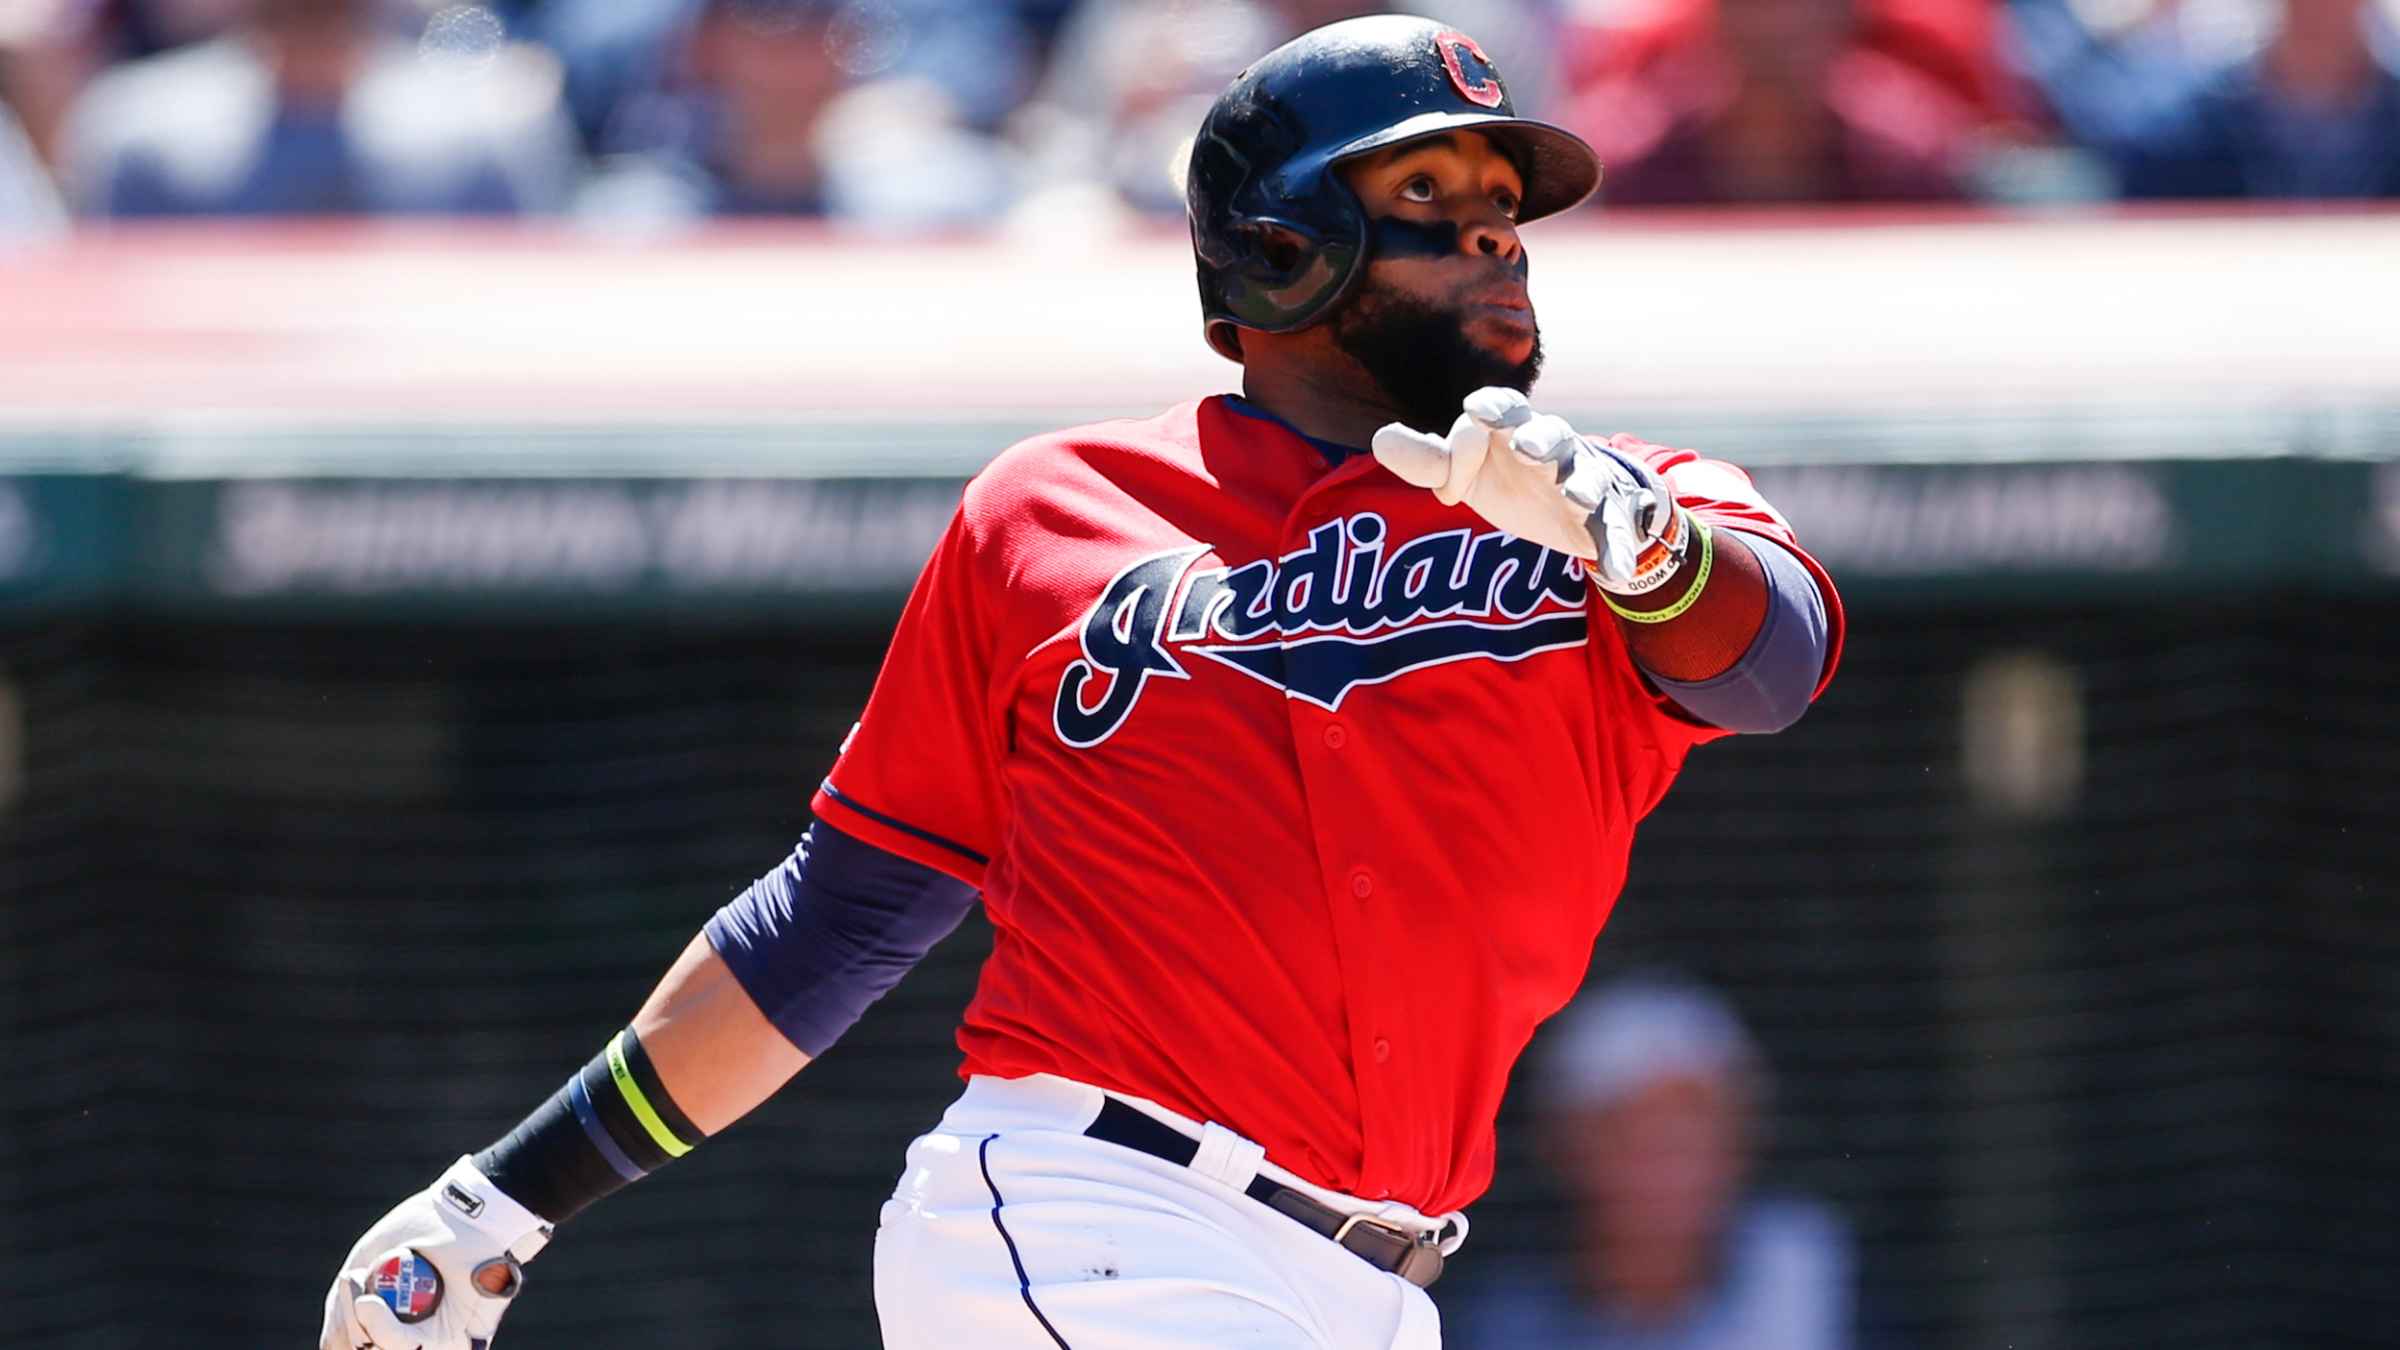 Summary and highlights of Cleveland Indians 2-7 Kansas City Royals